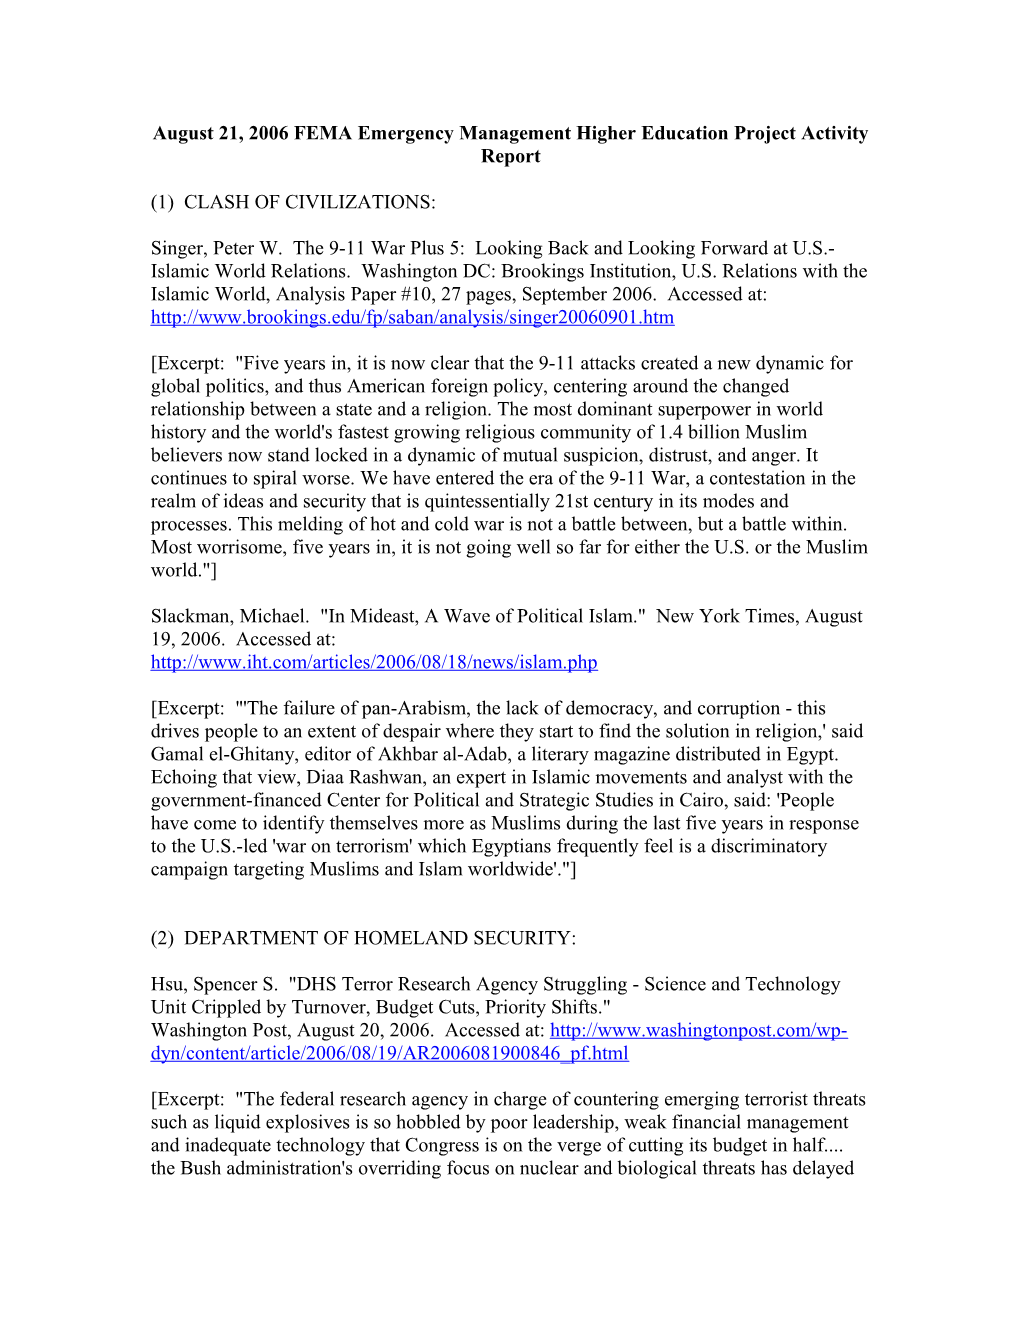 August 21, 2006 FEMA Emergency Management Higher Education Project Activity Report